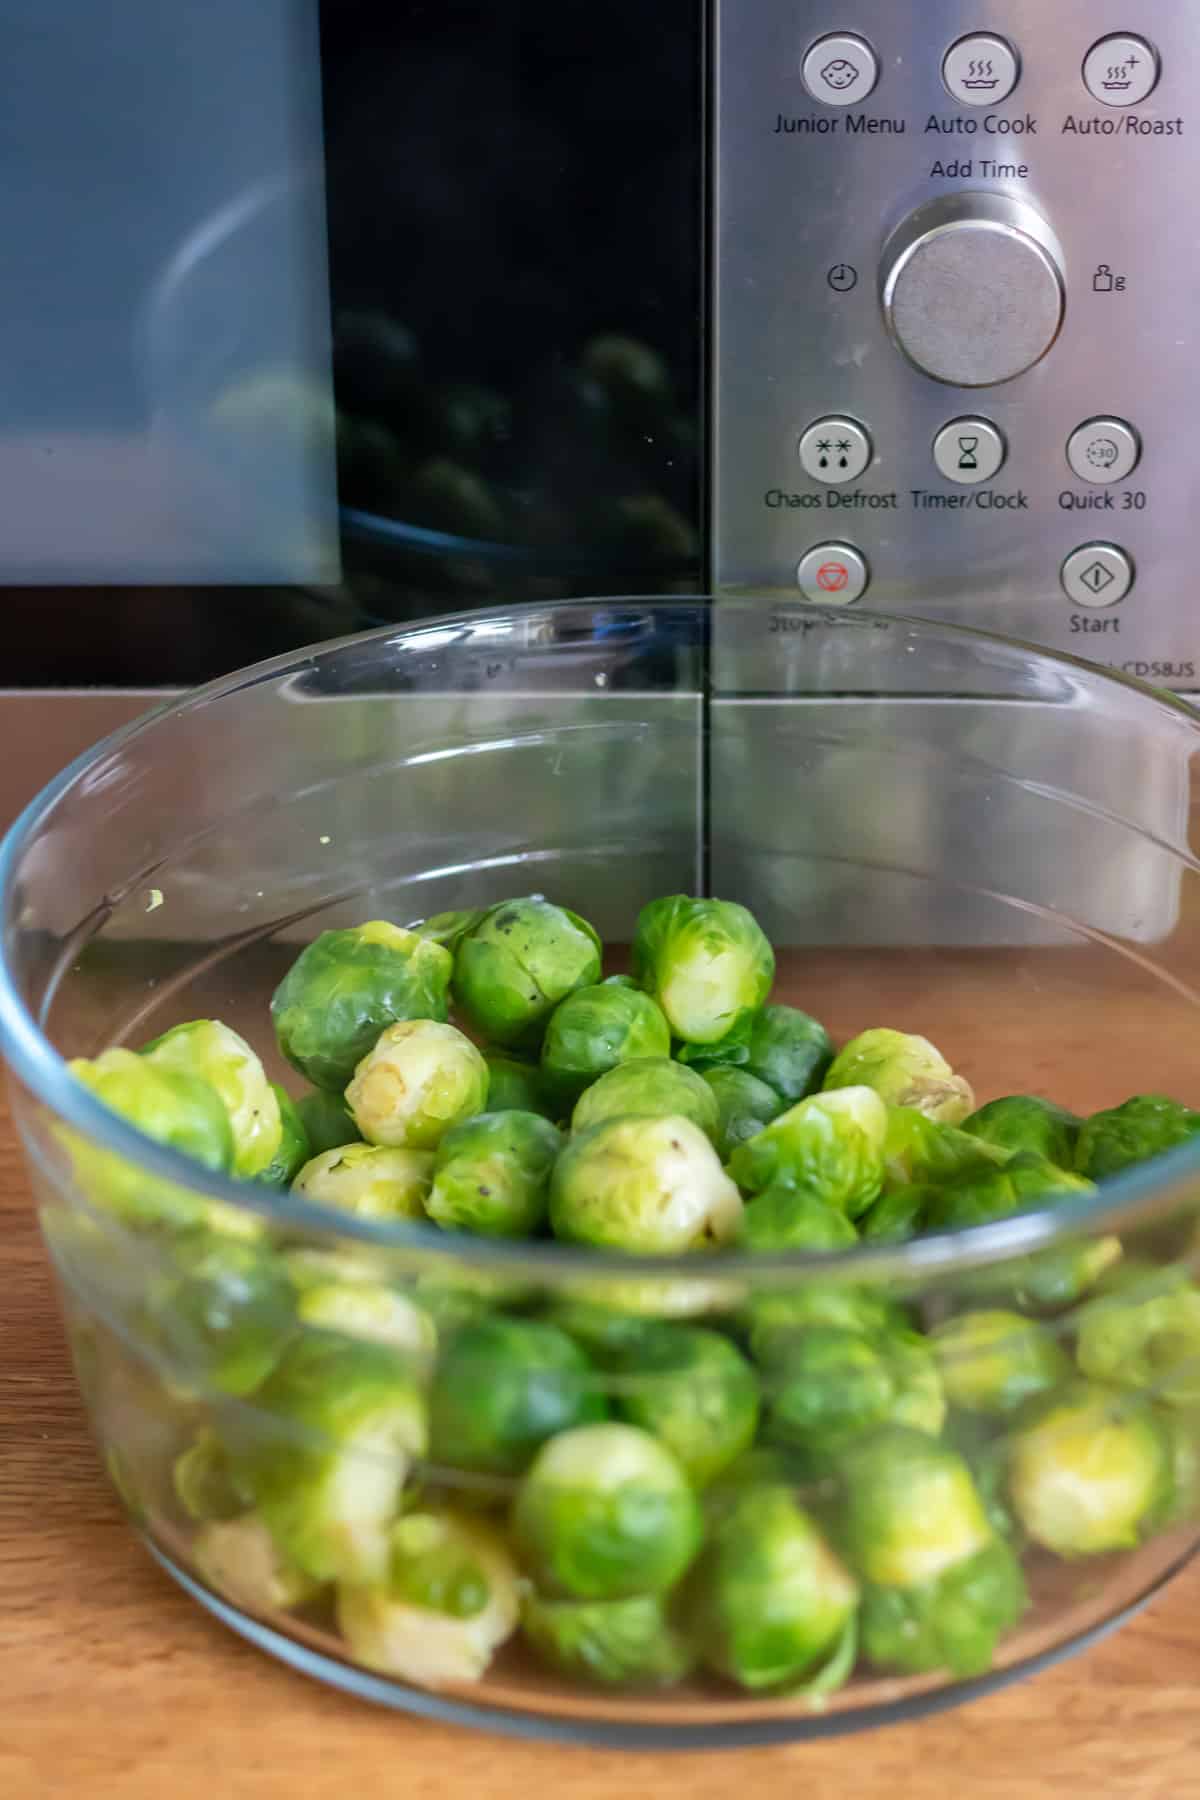 Cooked brussels sprouts in front of a microwave.